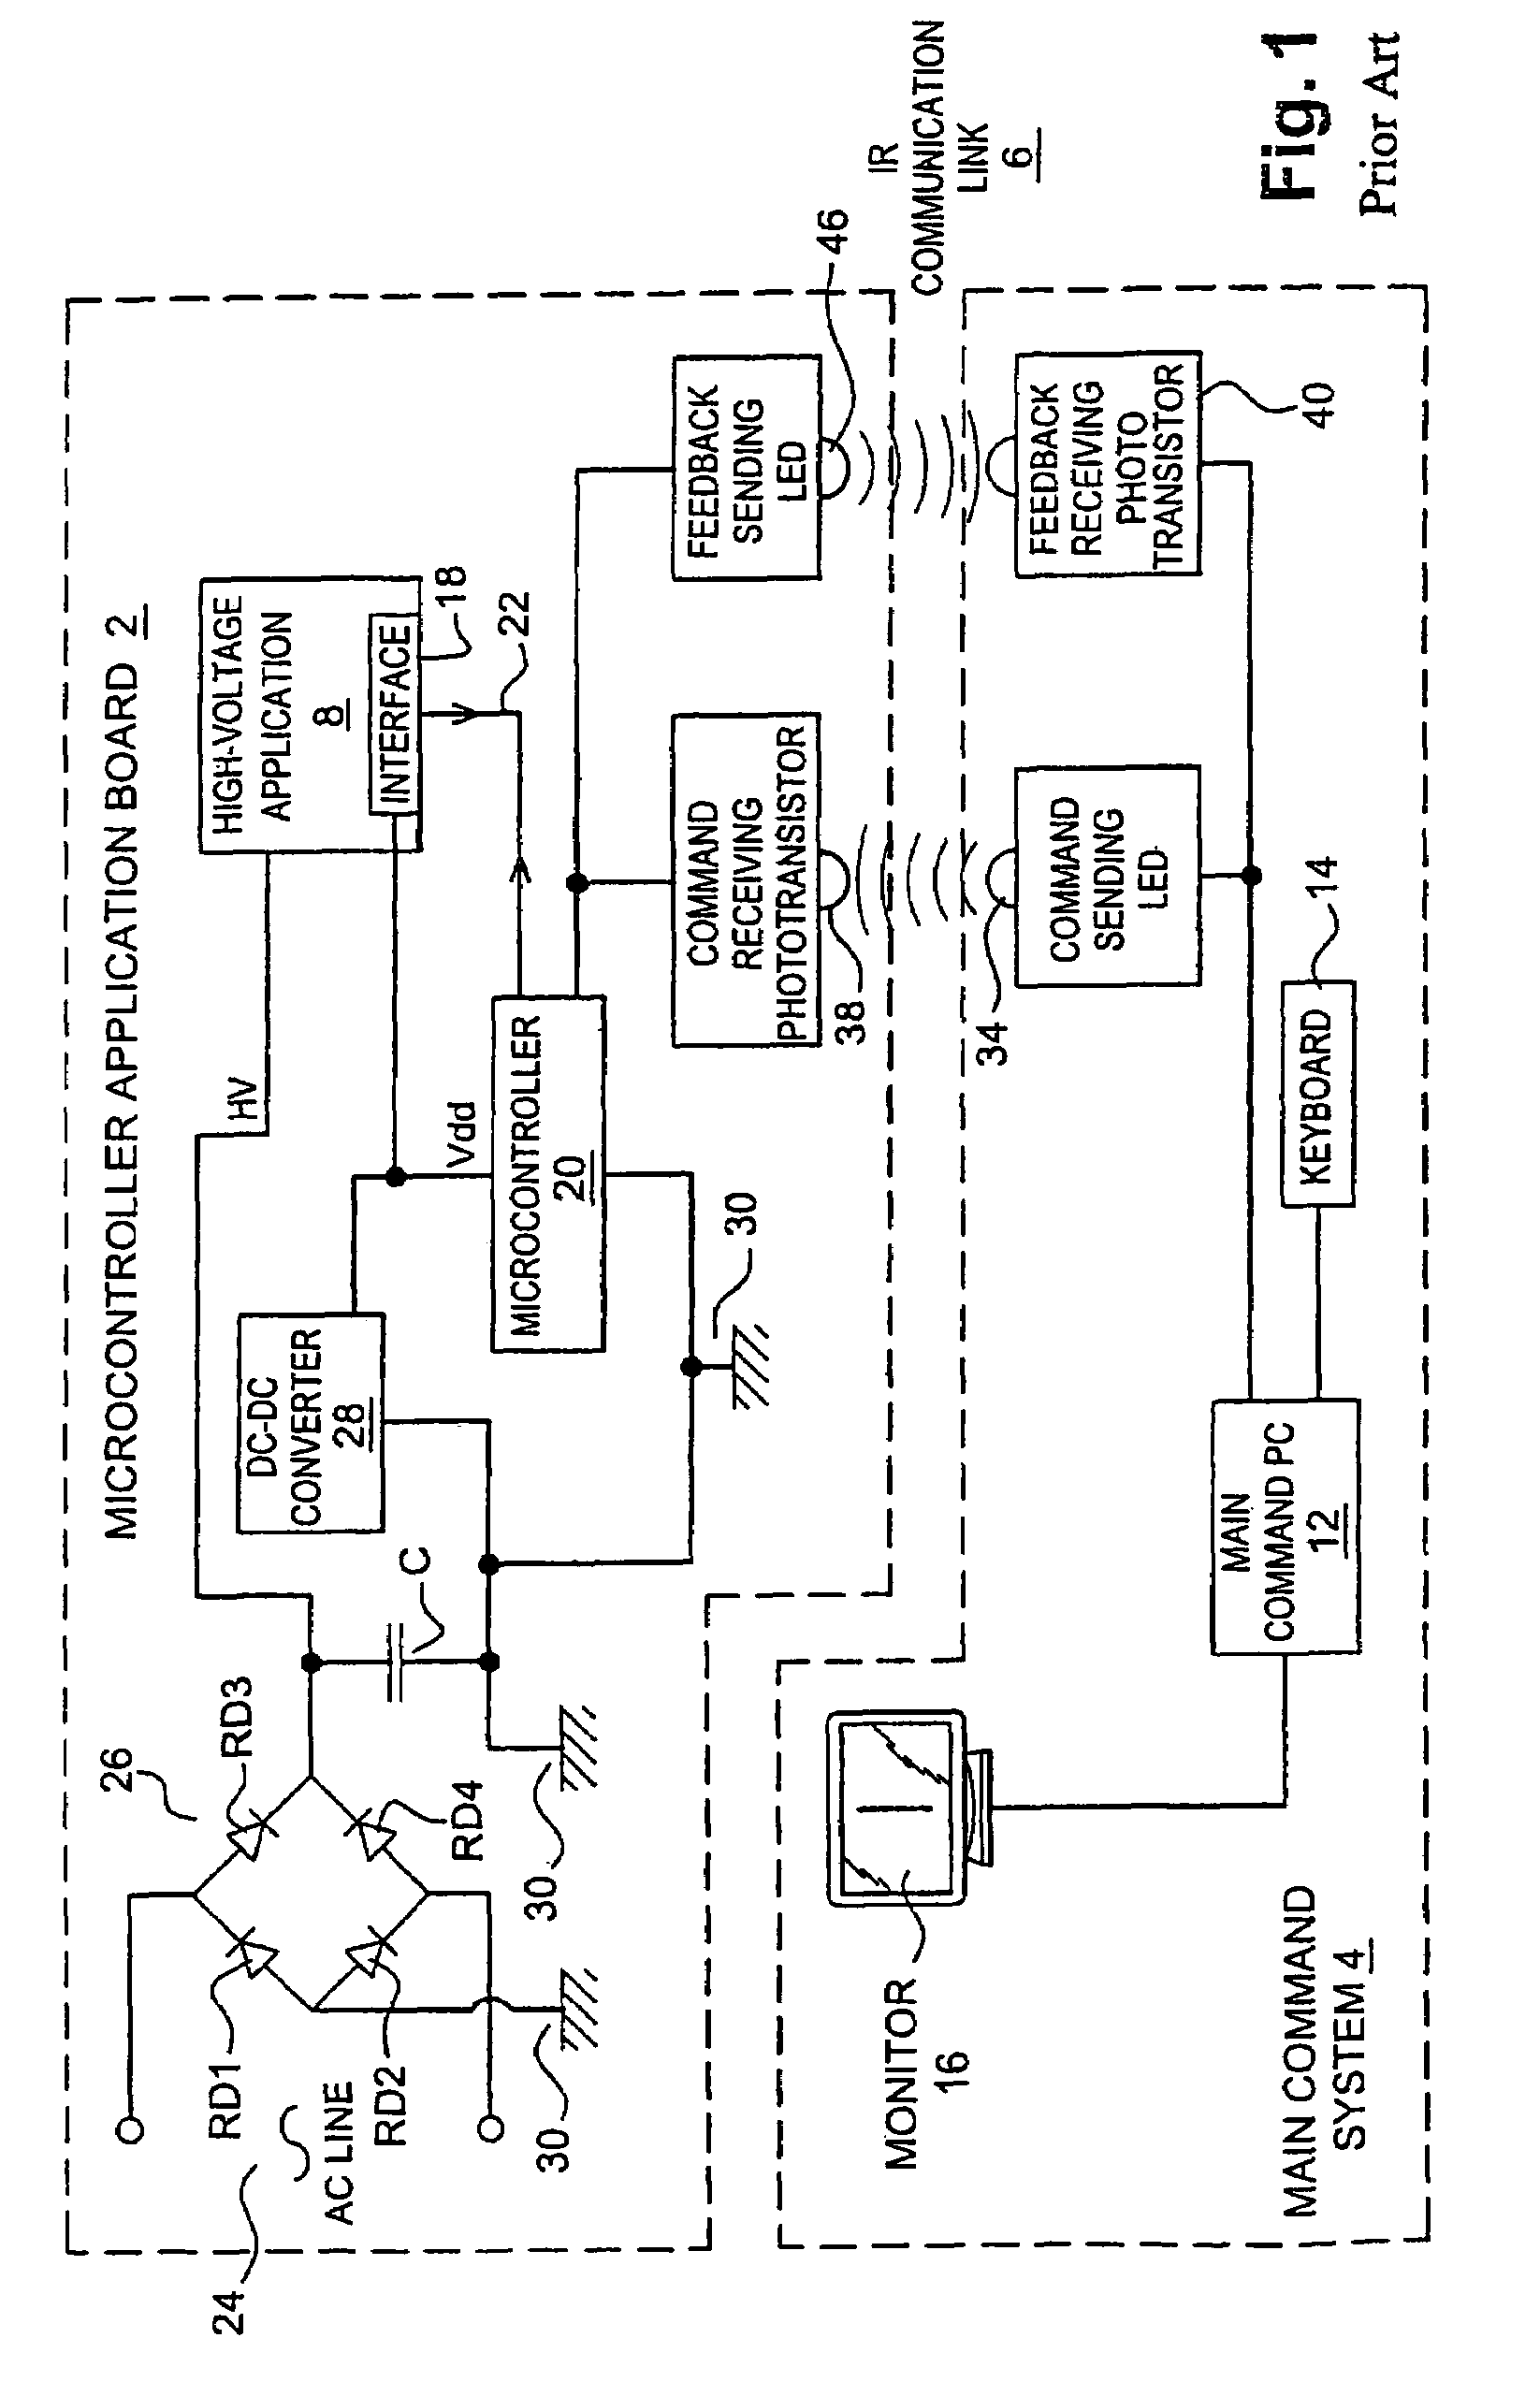 Optical coupling device and method for bidirectional data communication over a common signal line